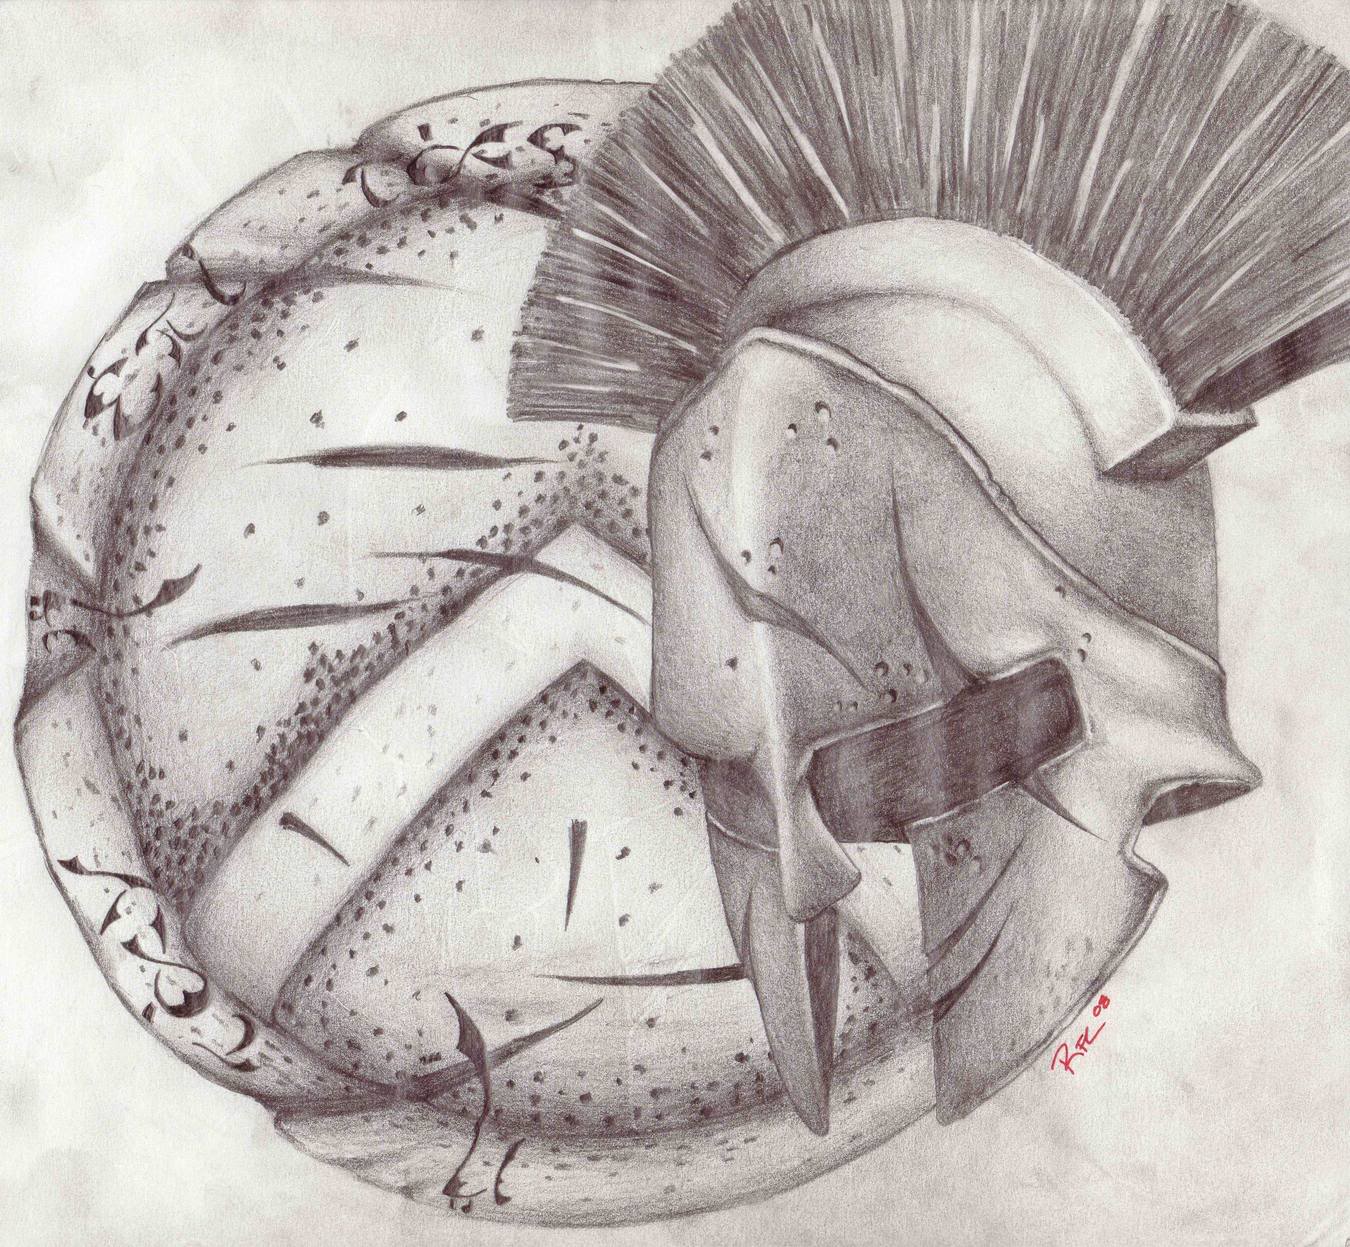 Personal Spartan Shield And Helmet Tattoo Concept.